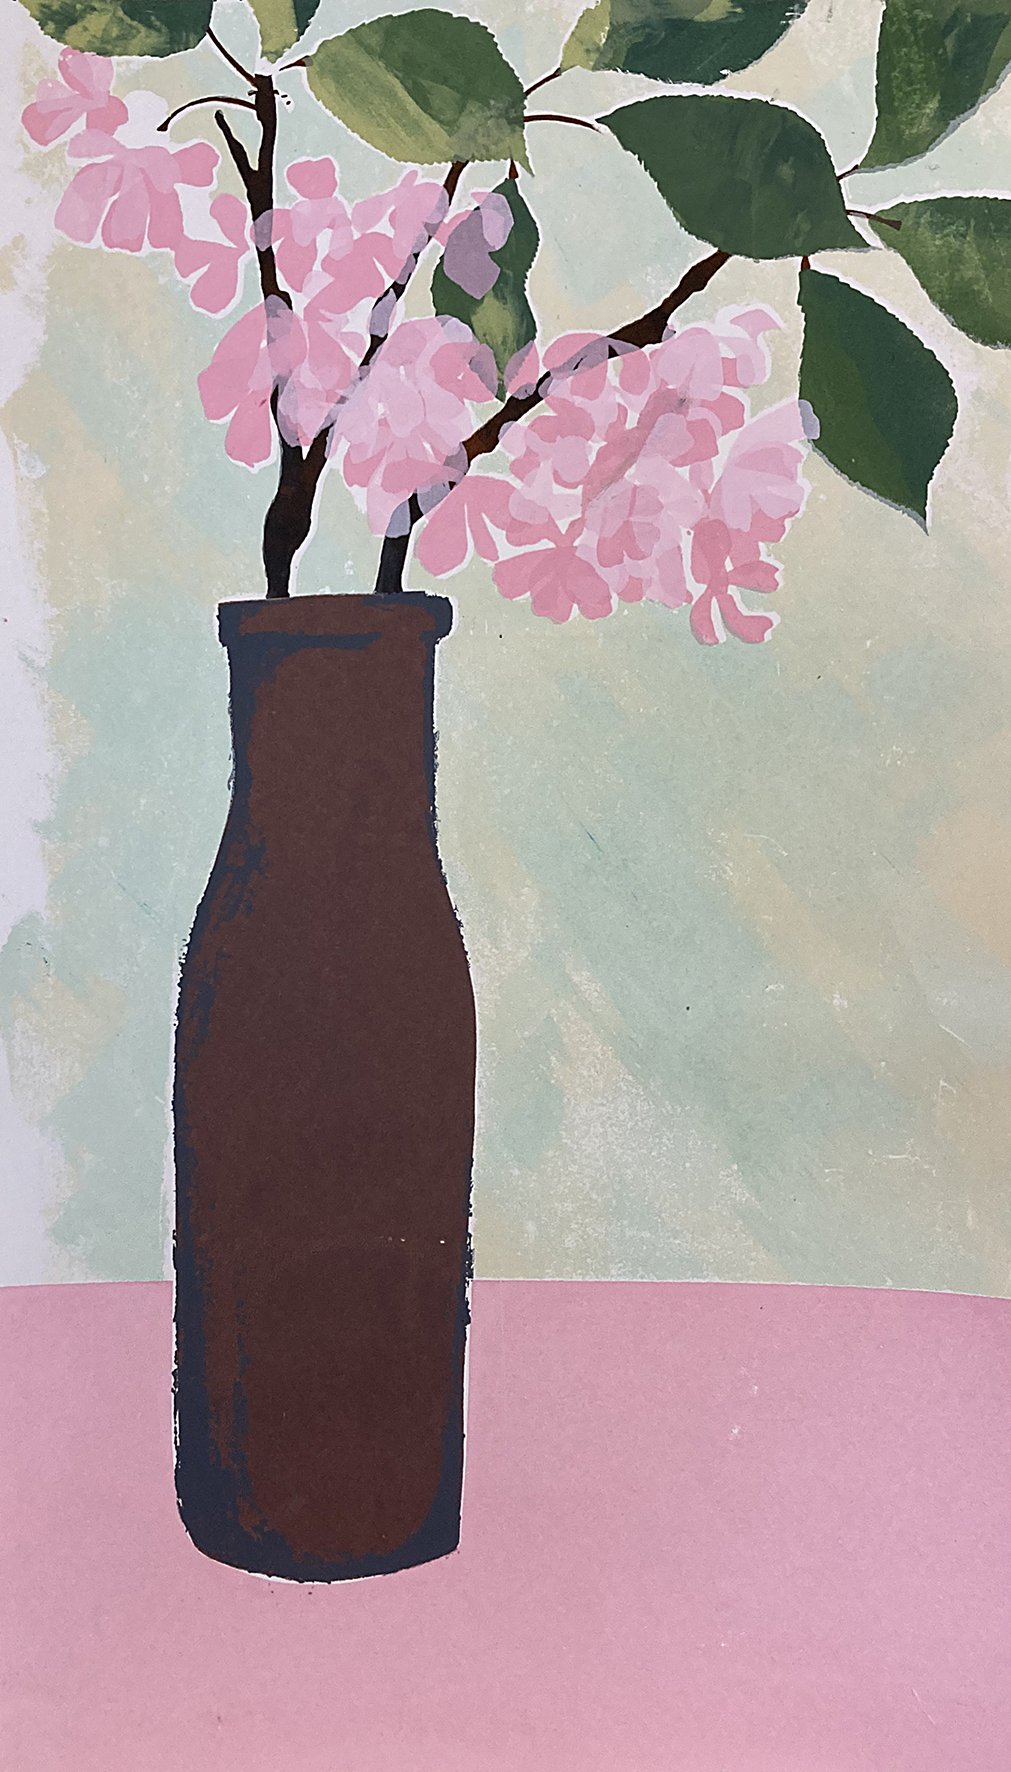   Amsterdam Vase and   Cherry Blossom  Variable mono screenprint on paper 340 x 600mm 